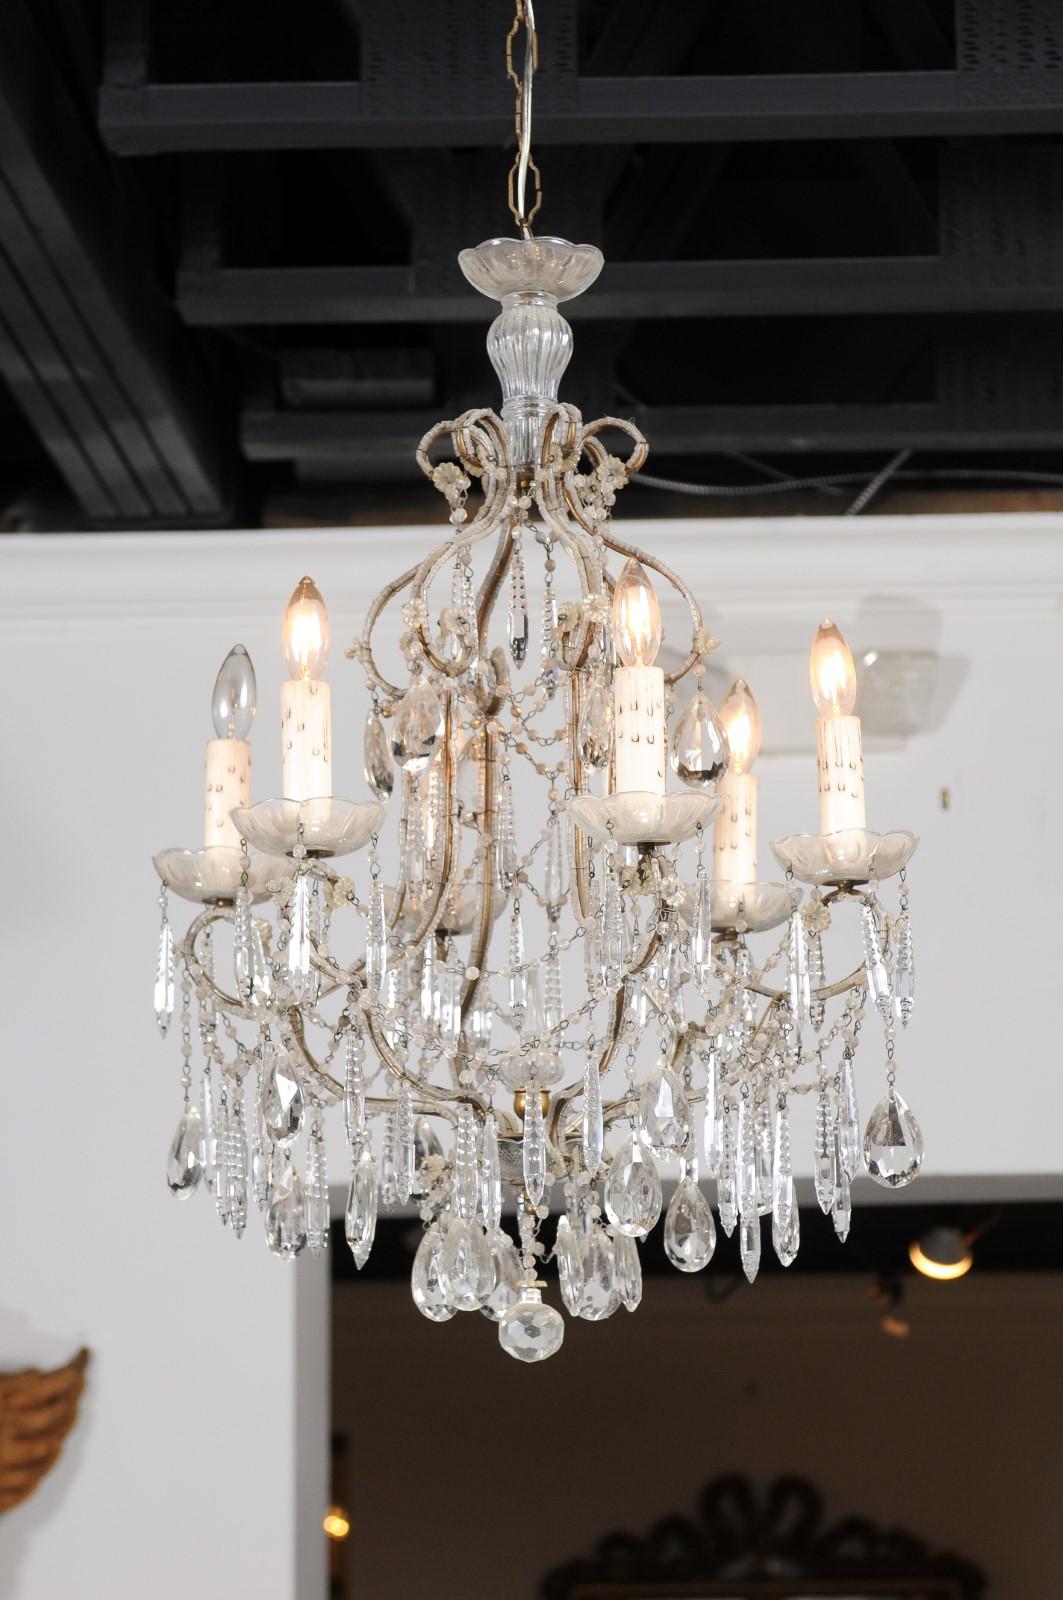 Italian 19th Century Six-Light Chandelier with Beaded Arms and Spear Crystals For Sale 6